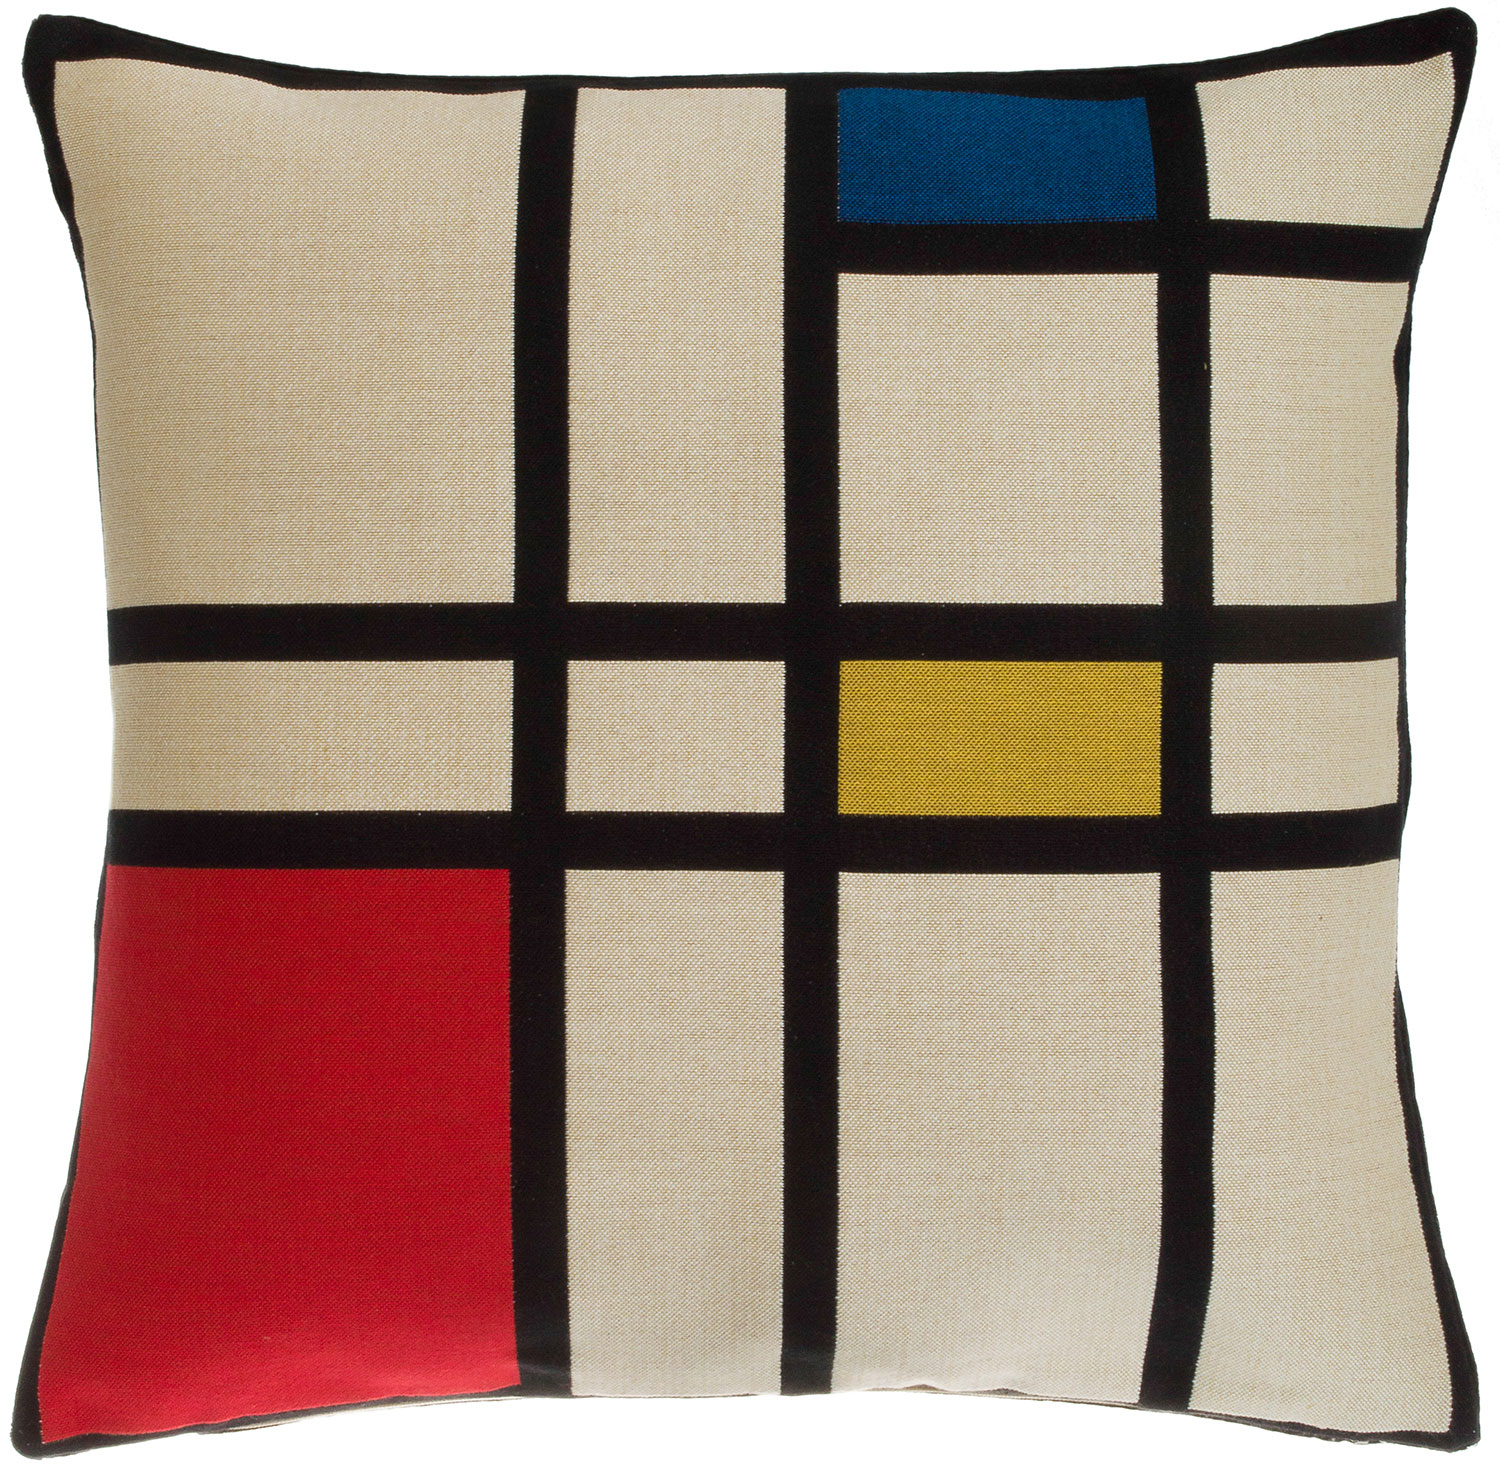 Cushion cover "Composition II in Red, Blue and Yellow" by Piet Mondrian